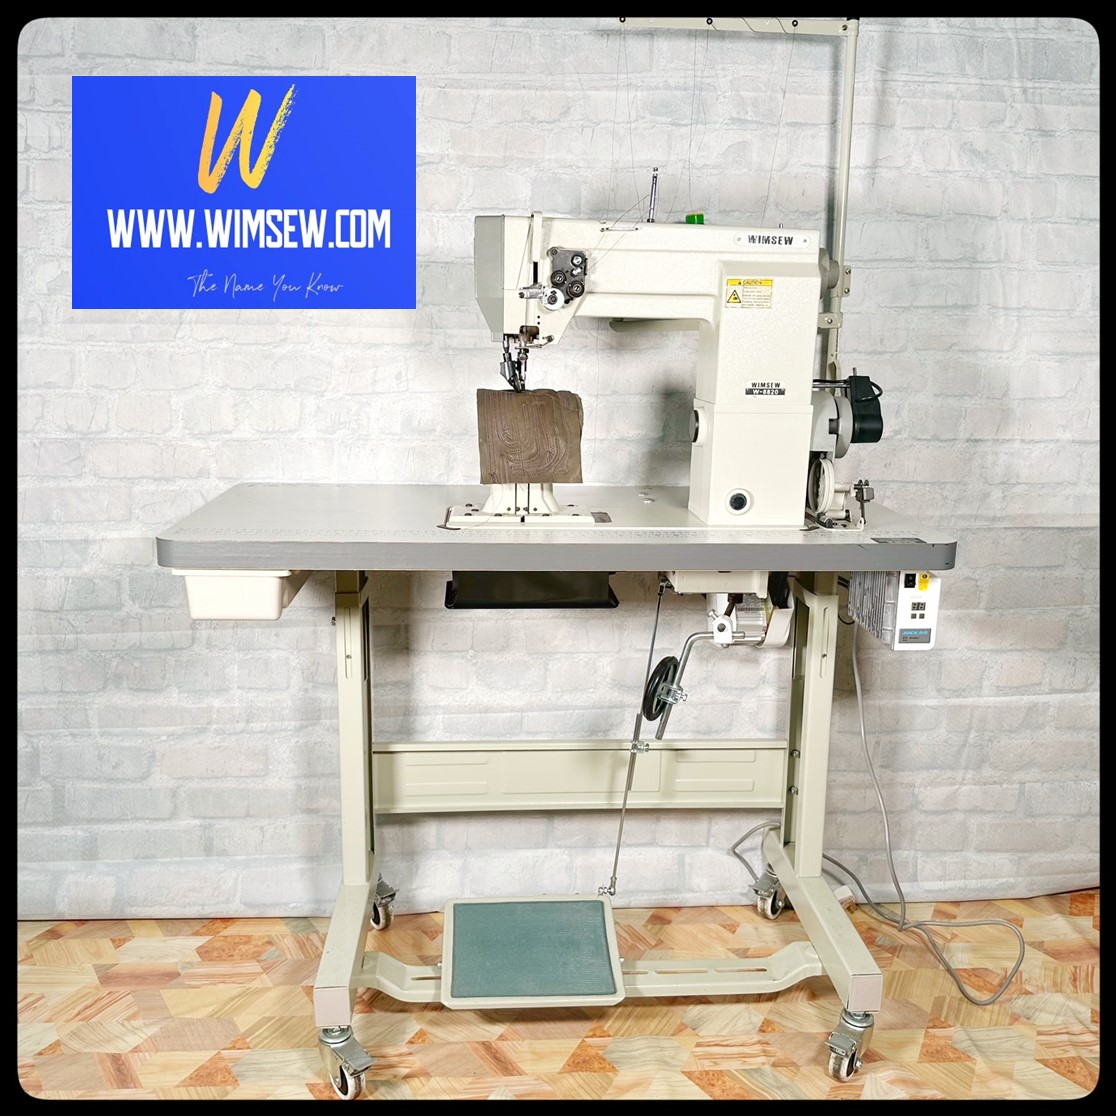 WIMSEW 8820 Post Machine - <span style='color: #ff0000;'>Call now for more information. 020 8767 0036 - choose option 3</span>